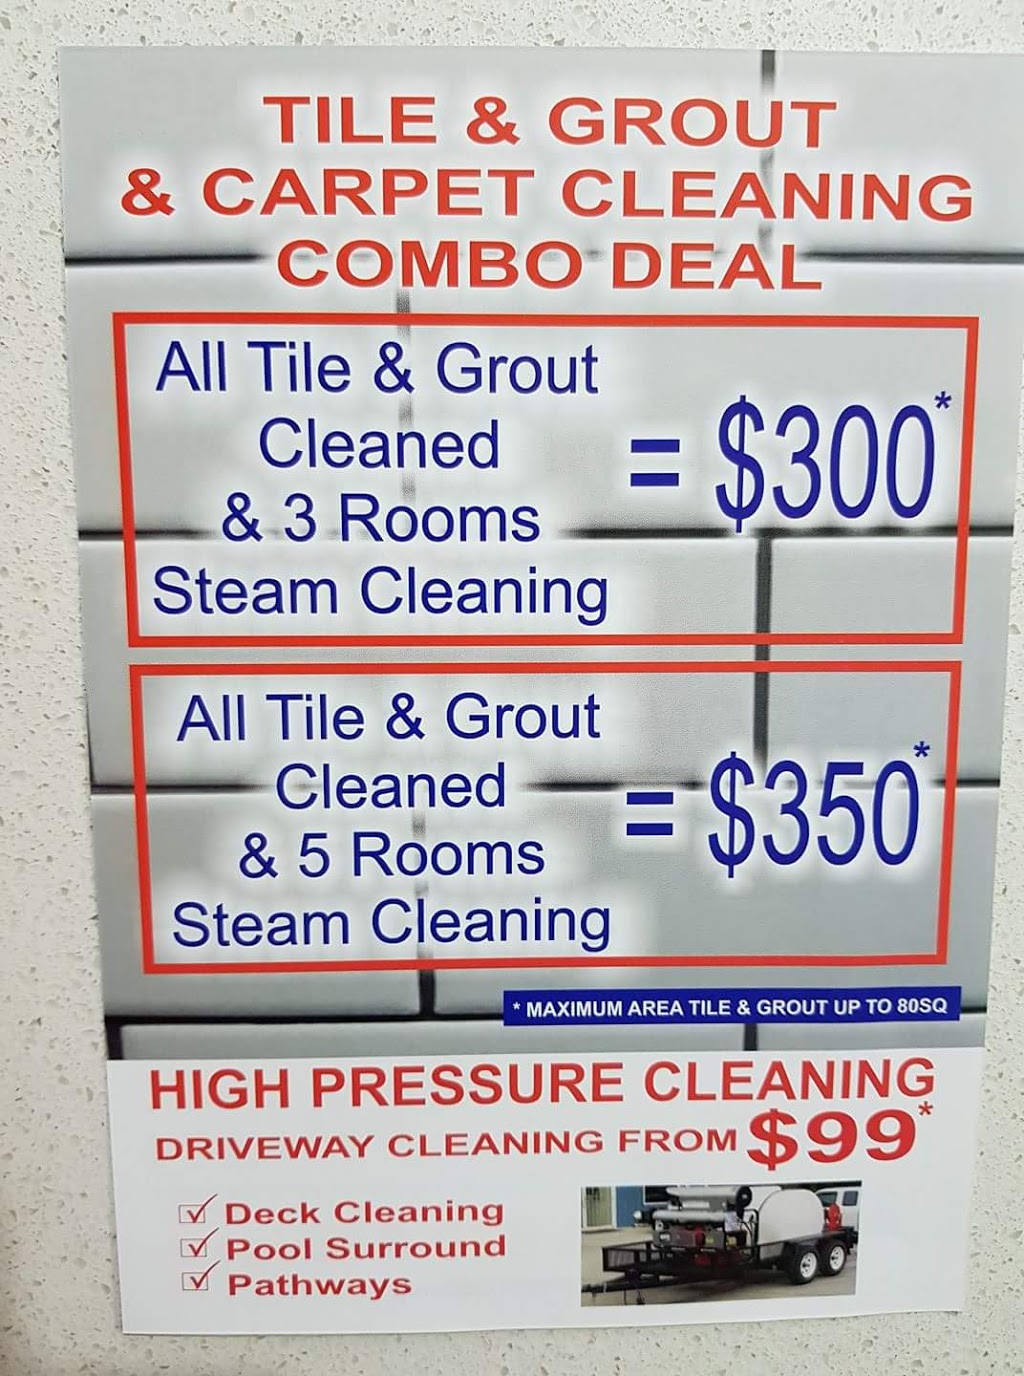 steves steam cleaning | 24 Brightstone Dr, Clyde North VIC 3978, Australia | Phone: 0404 670 636